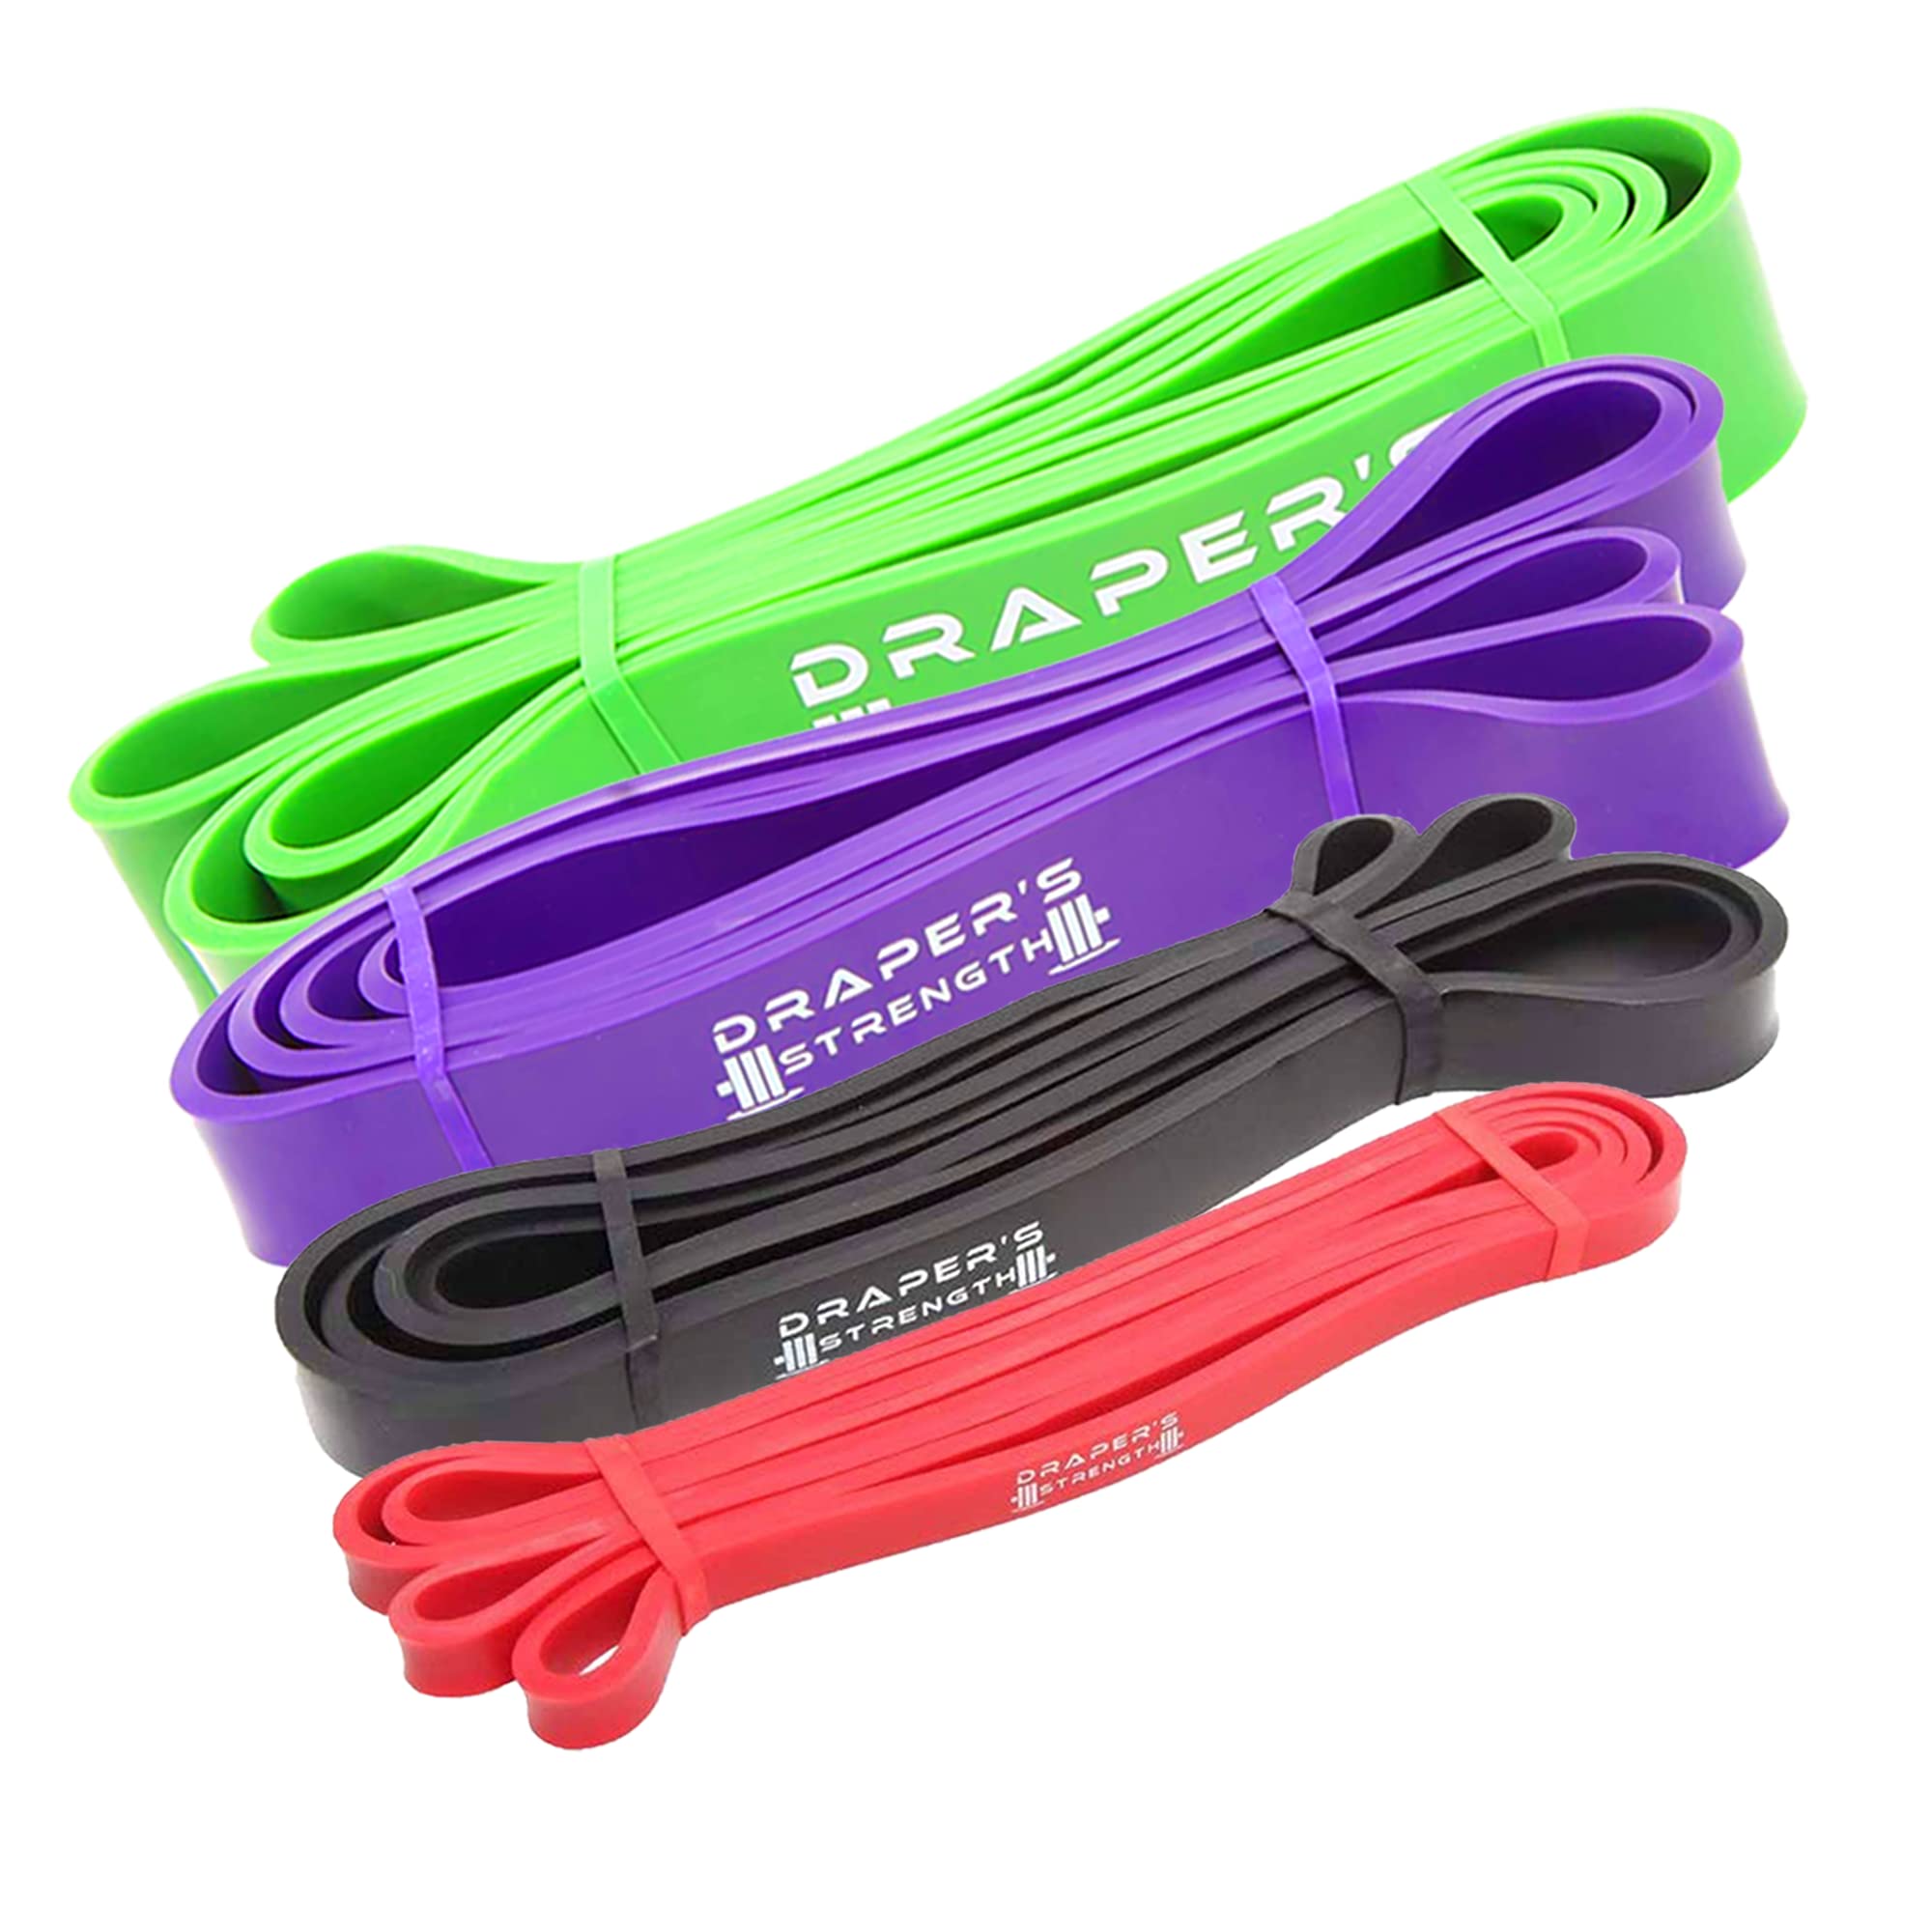 9. 4-Band Set (Red-Green, 5-120 lbs)